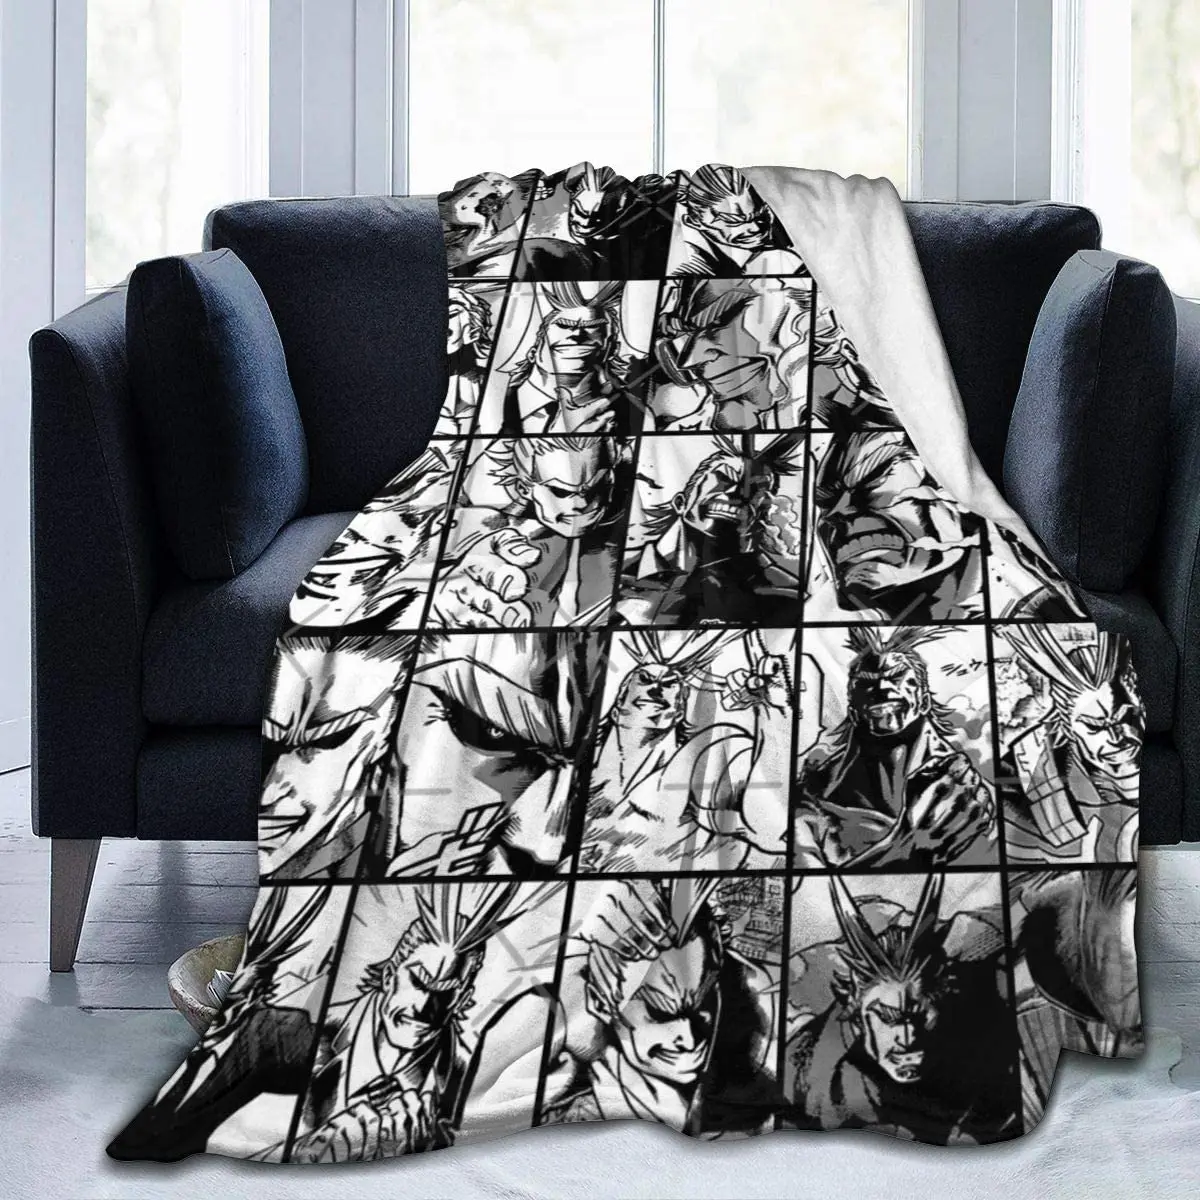 

New Collage All Might Fleece Throw Anim Blanket, Fuzzy Warm Throws for Winter Bedding, Couch and Plush House Warming Decor Gift